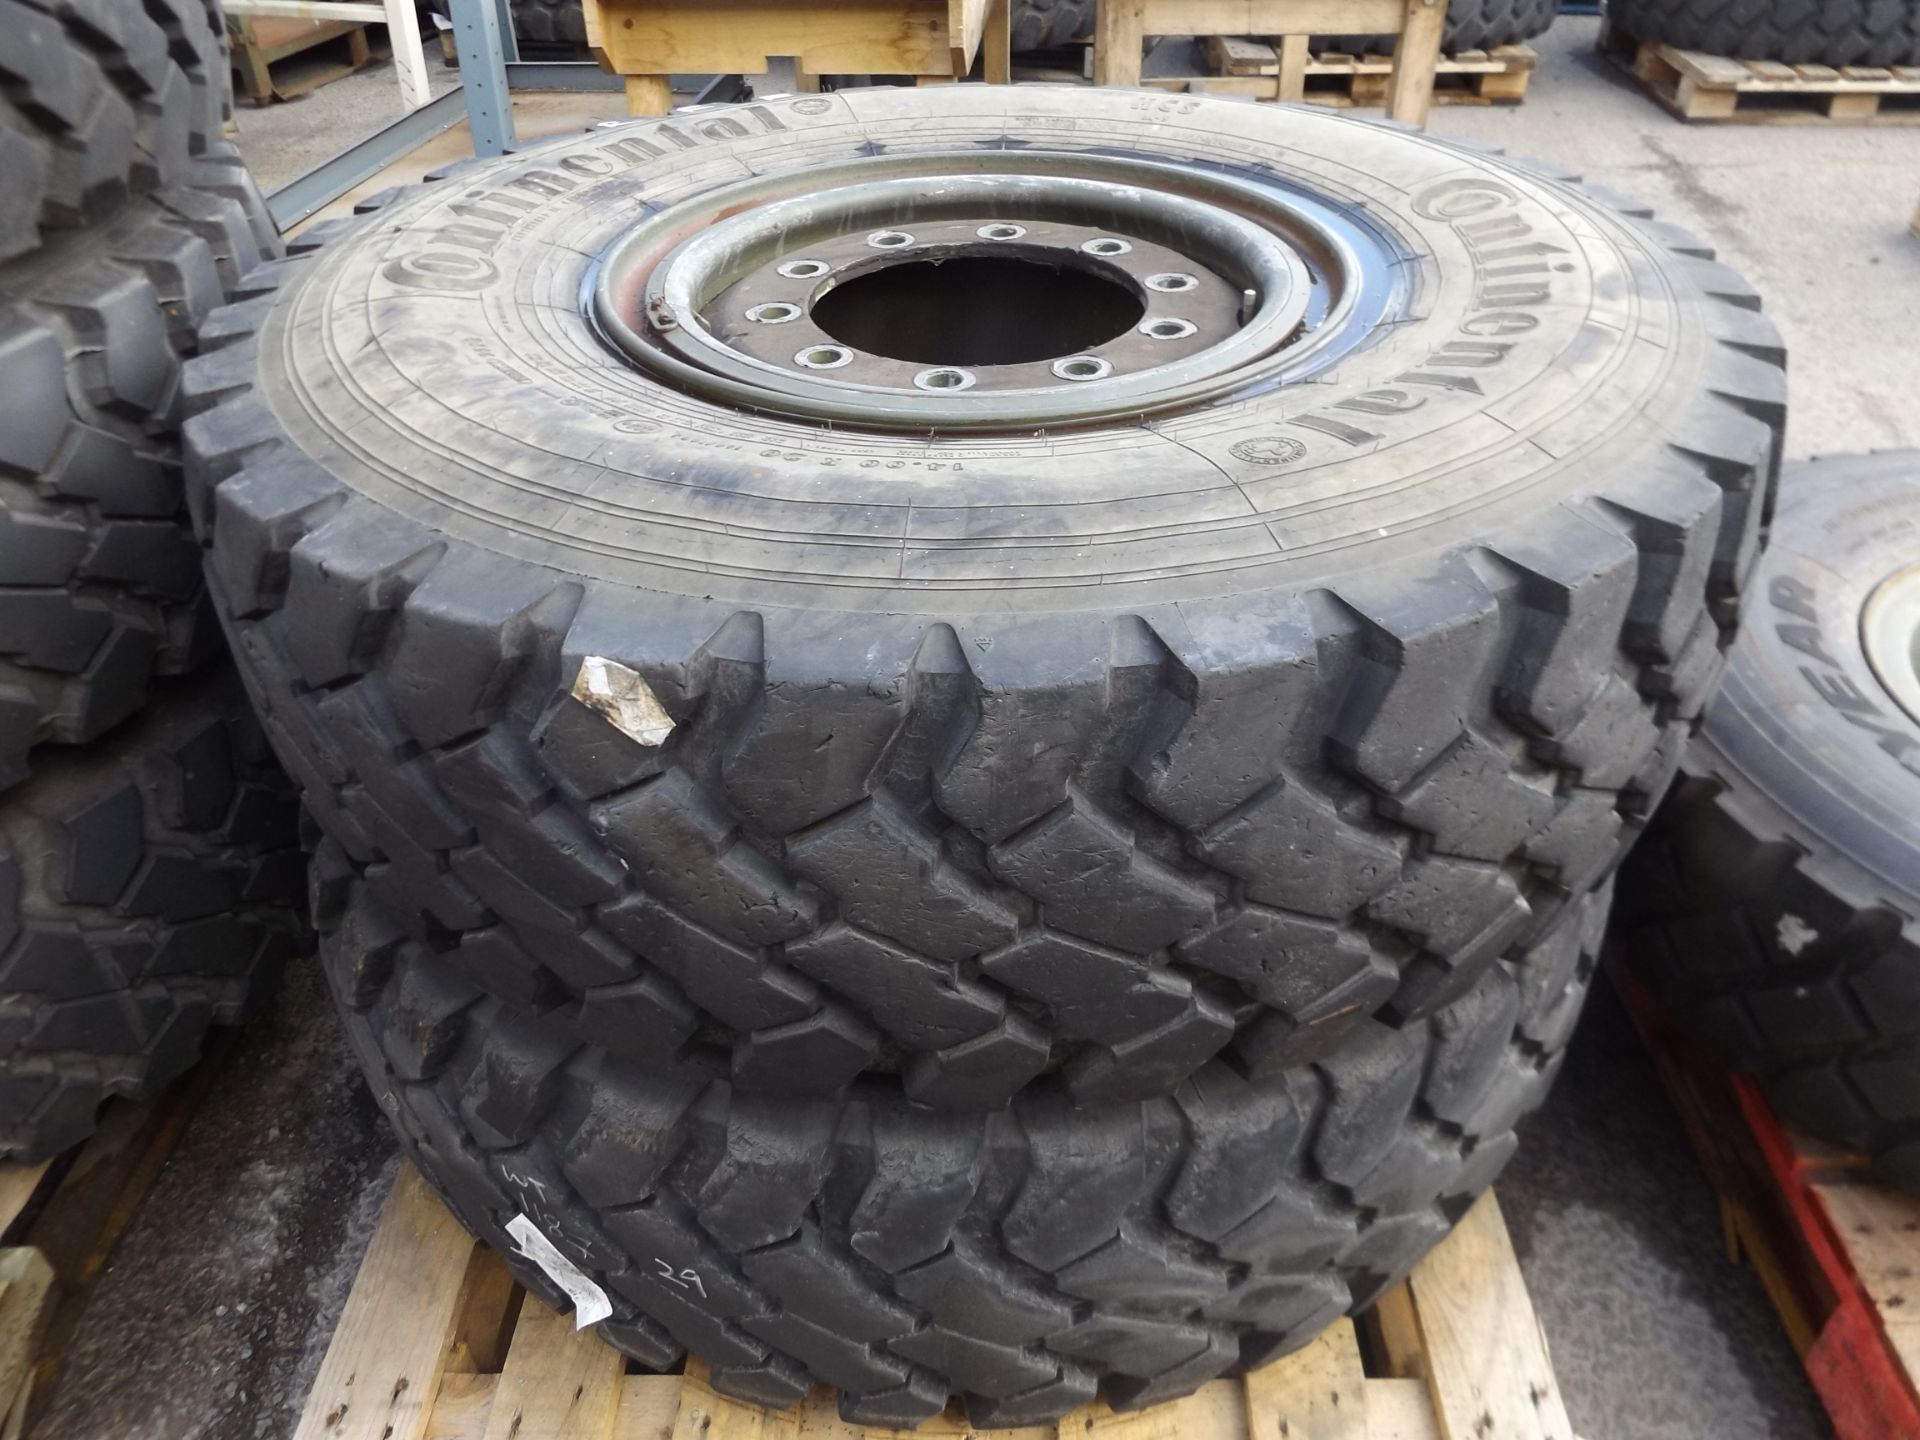 2 x Continental 14.00 R20 Tyres Complete With 10 Stud Rims and Run Flat Assys